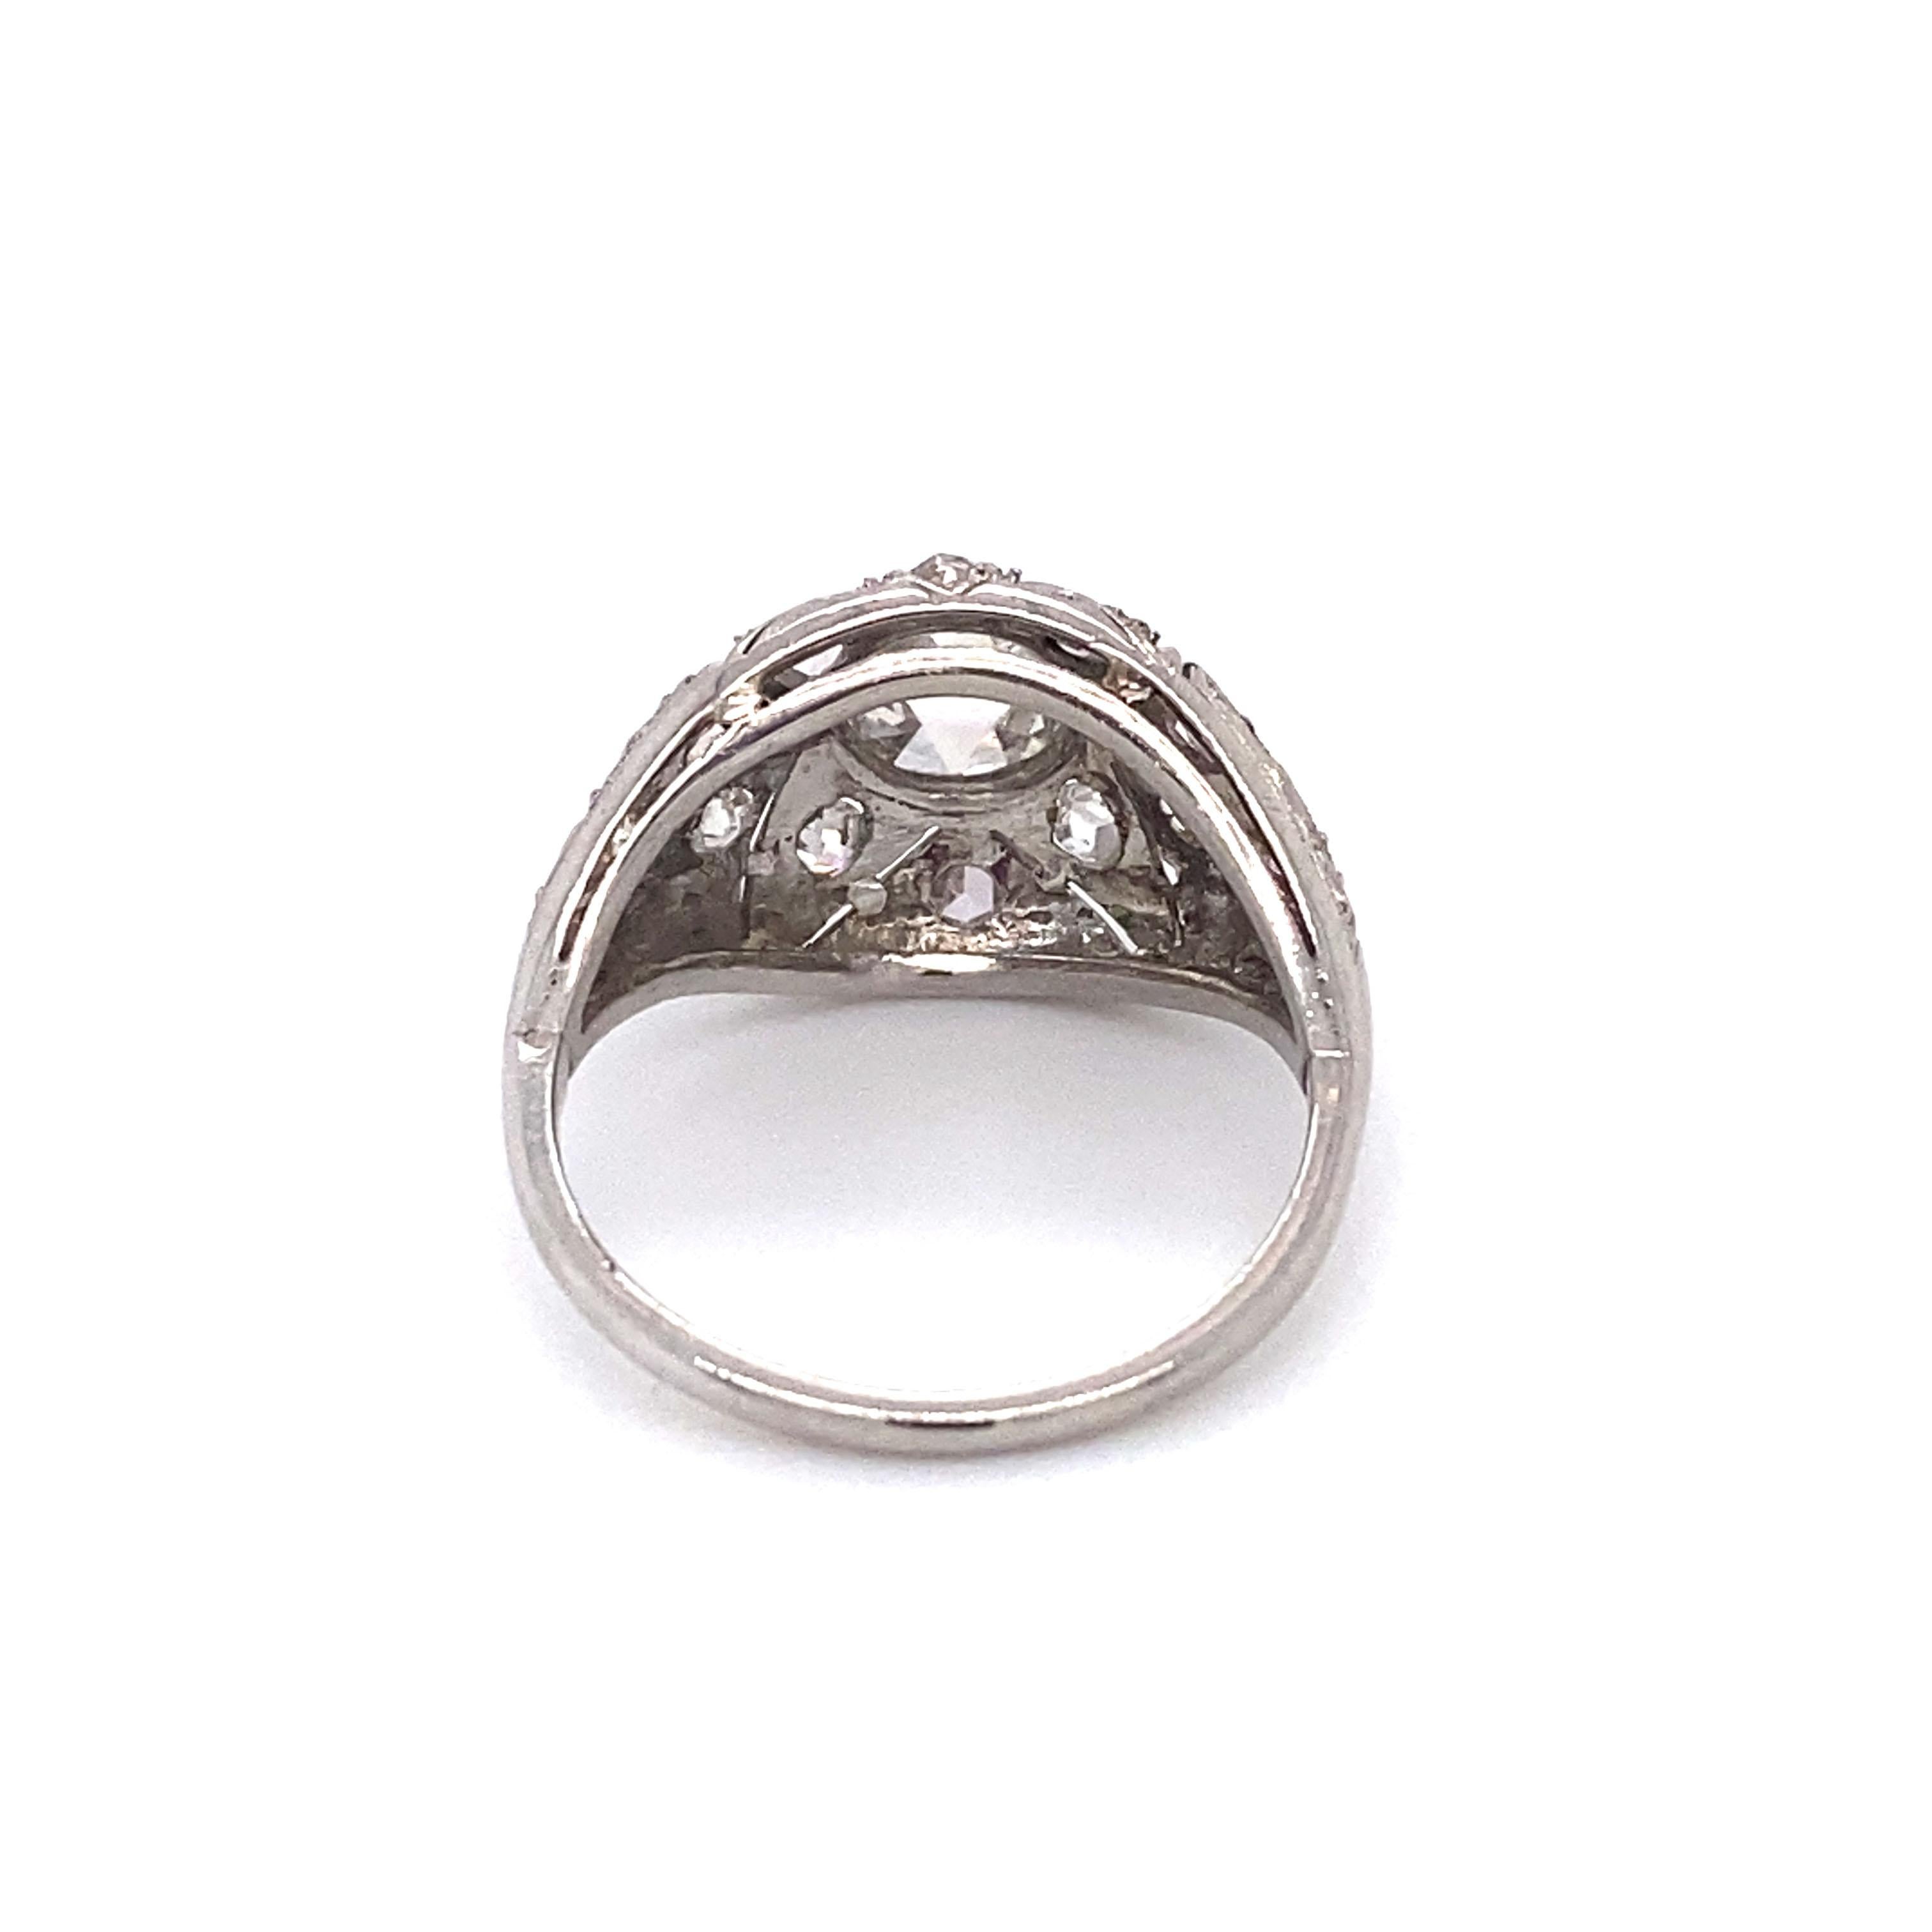 Women's Circa 1890s Victorian Rose Cut Diamond Ring in Platinum and 14K White Gold For Sale